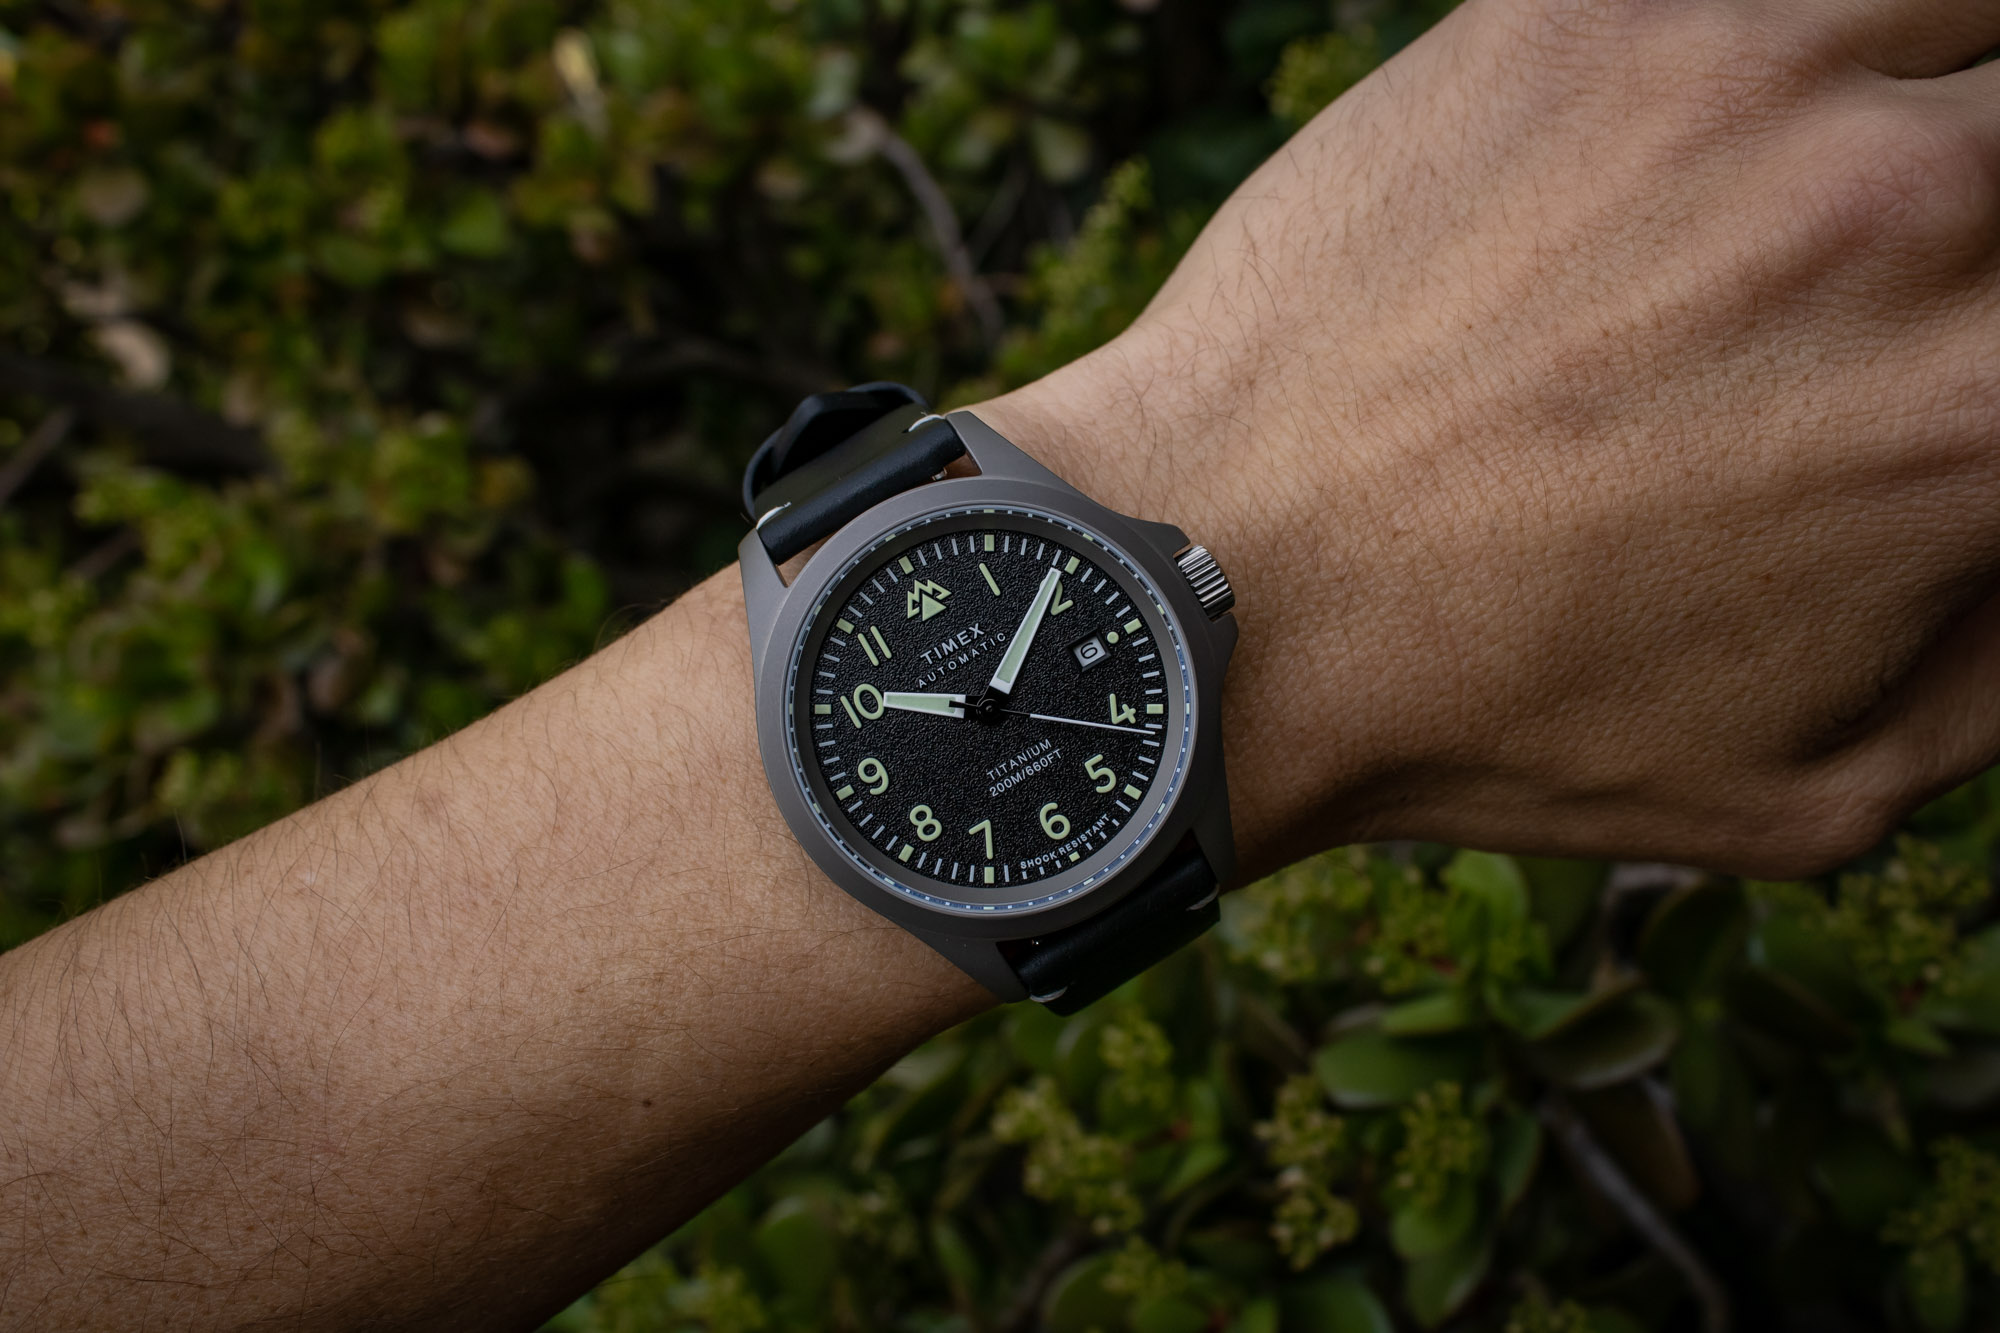 Hands-On: Timex Expedition North Titanium Automatic Watch | aBlogtoWatch